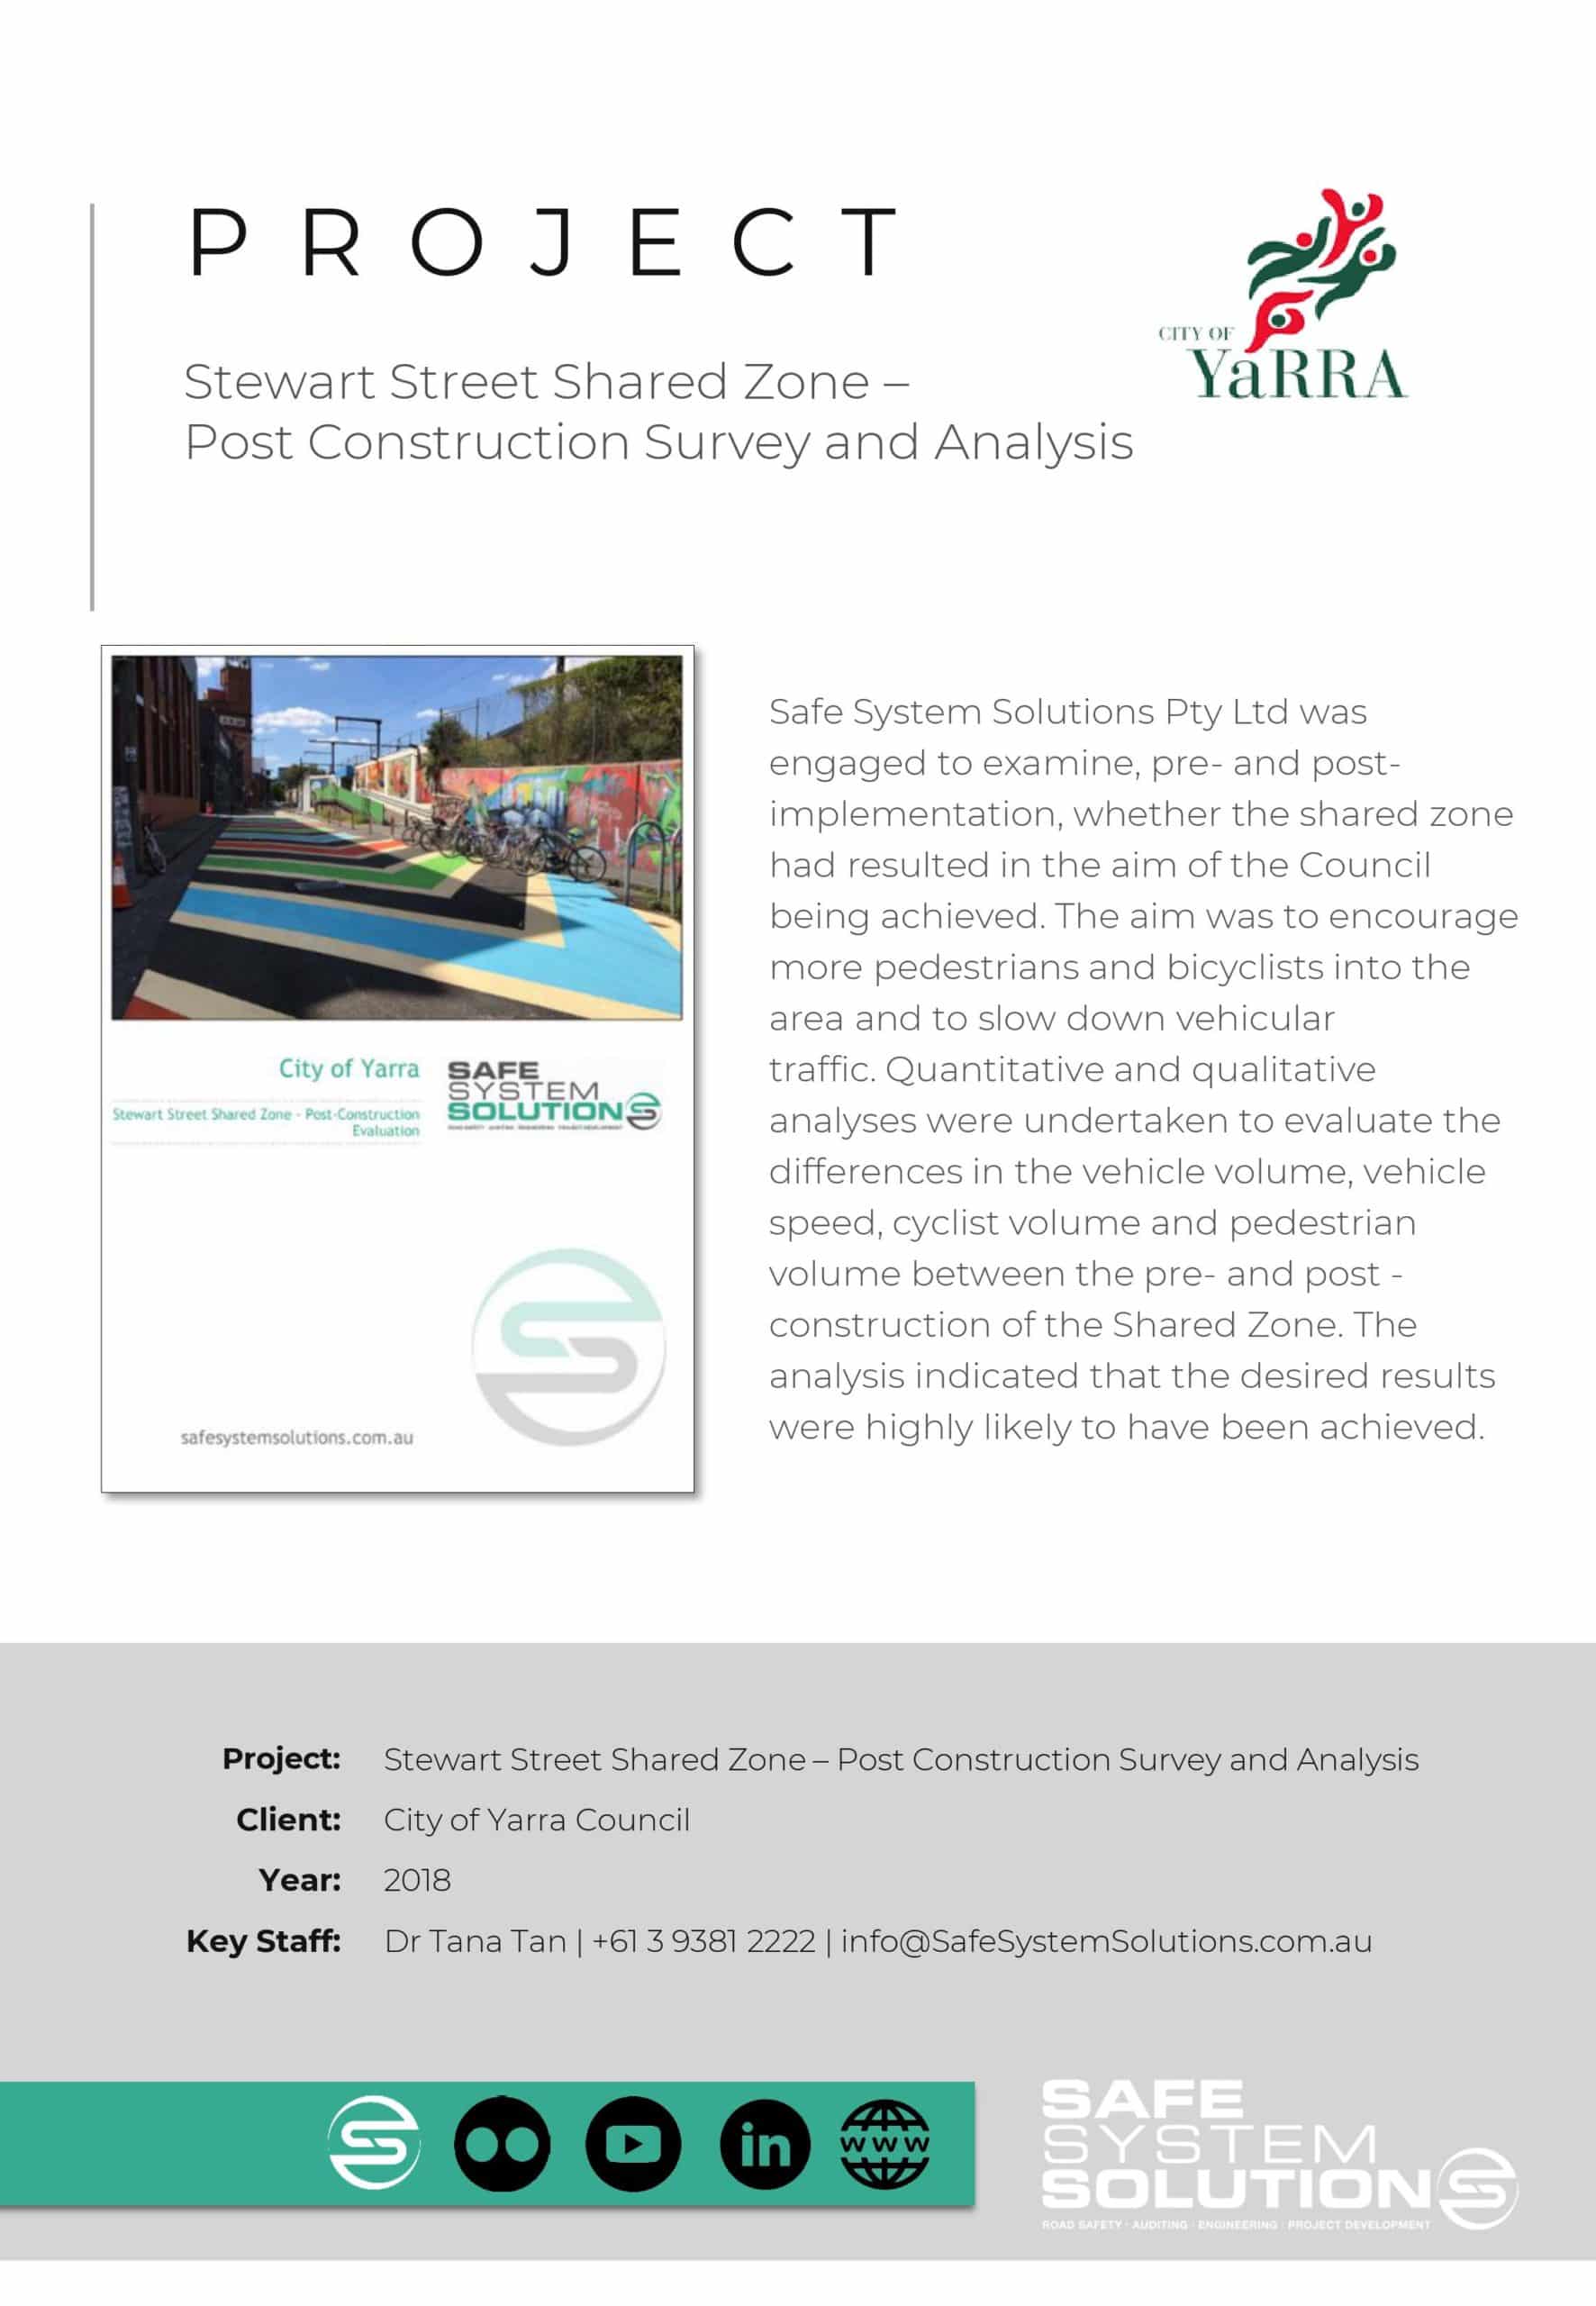 Stewart Street Shared Zone –Post Construction Survey and Analysis